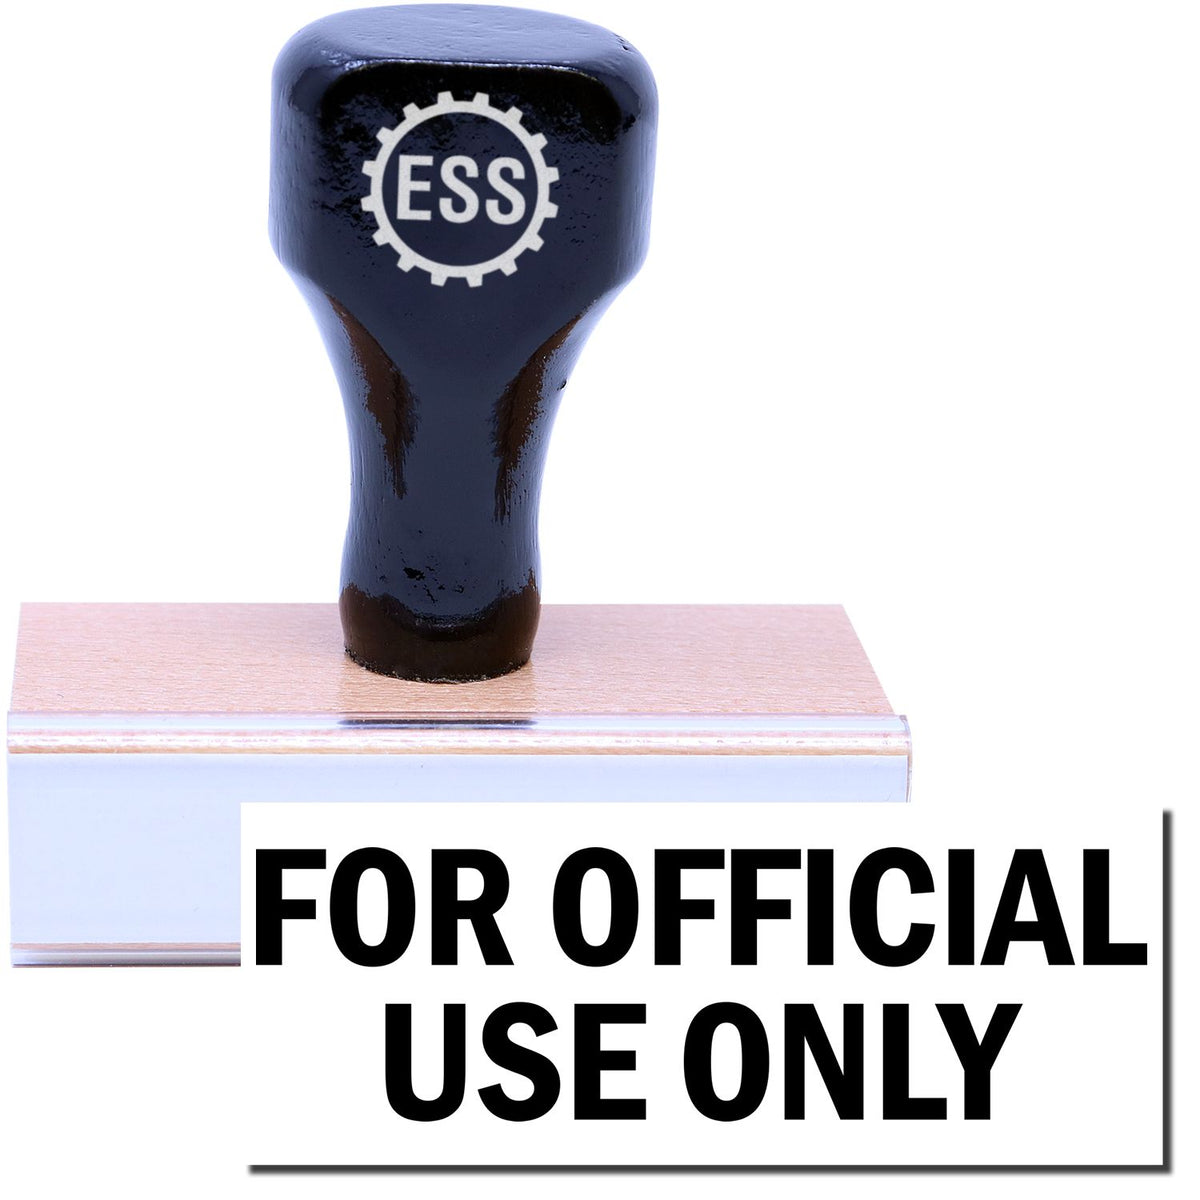 A stock office rubber stamp with a stamped image showing how the text &quot;FOR OFFICIAL USE ONLY&quot; is displayed after stamping.